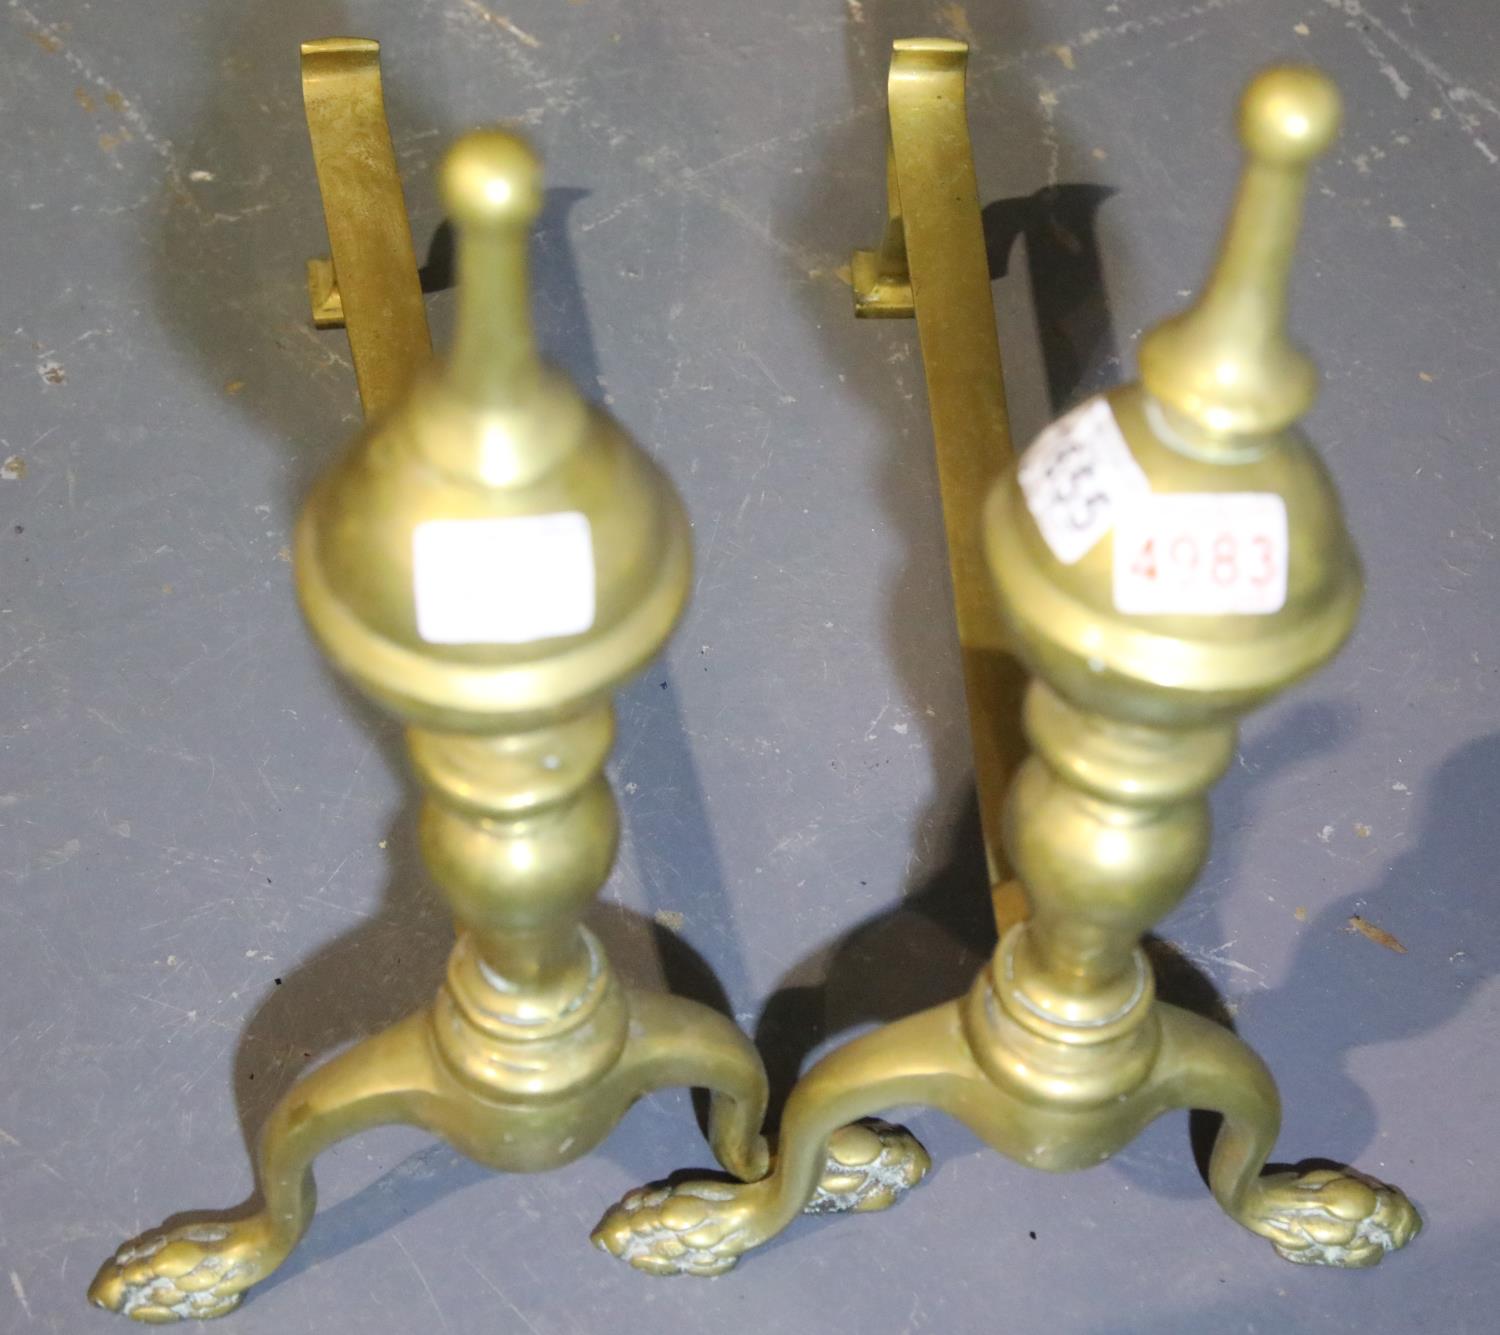 Pair of large antique brass fire dogs. P&P Group 3 (£25+VAT for the first lot and £5+VAT for